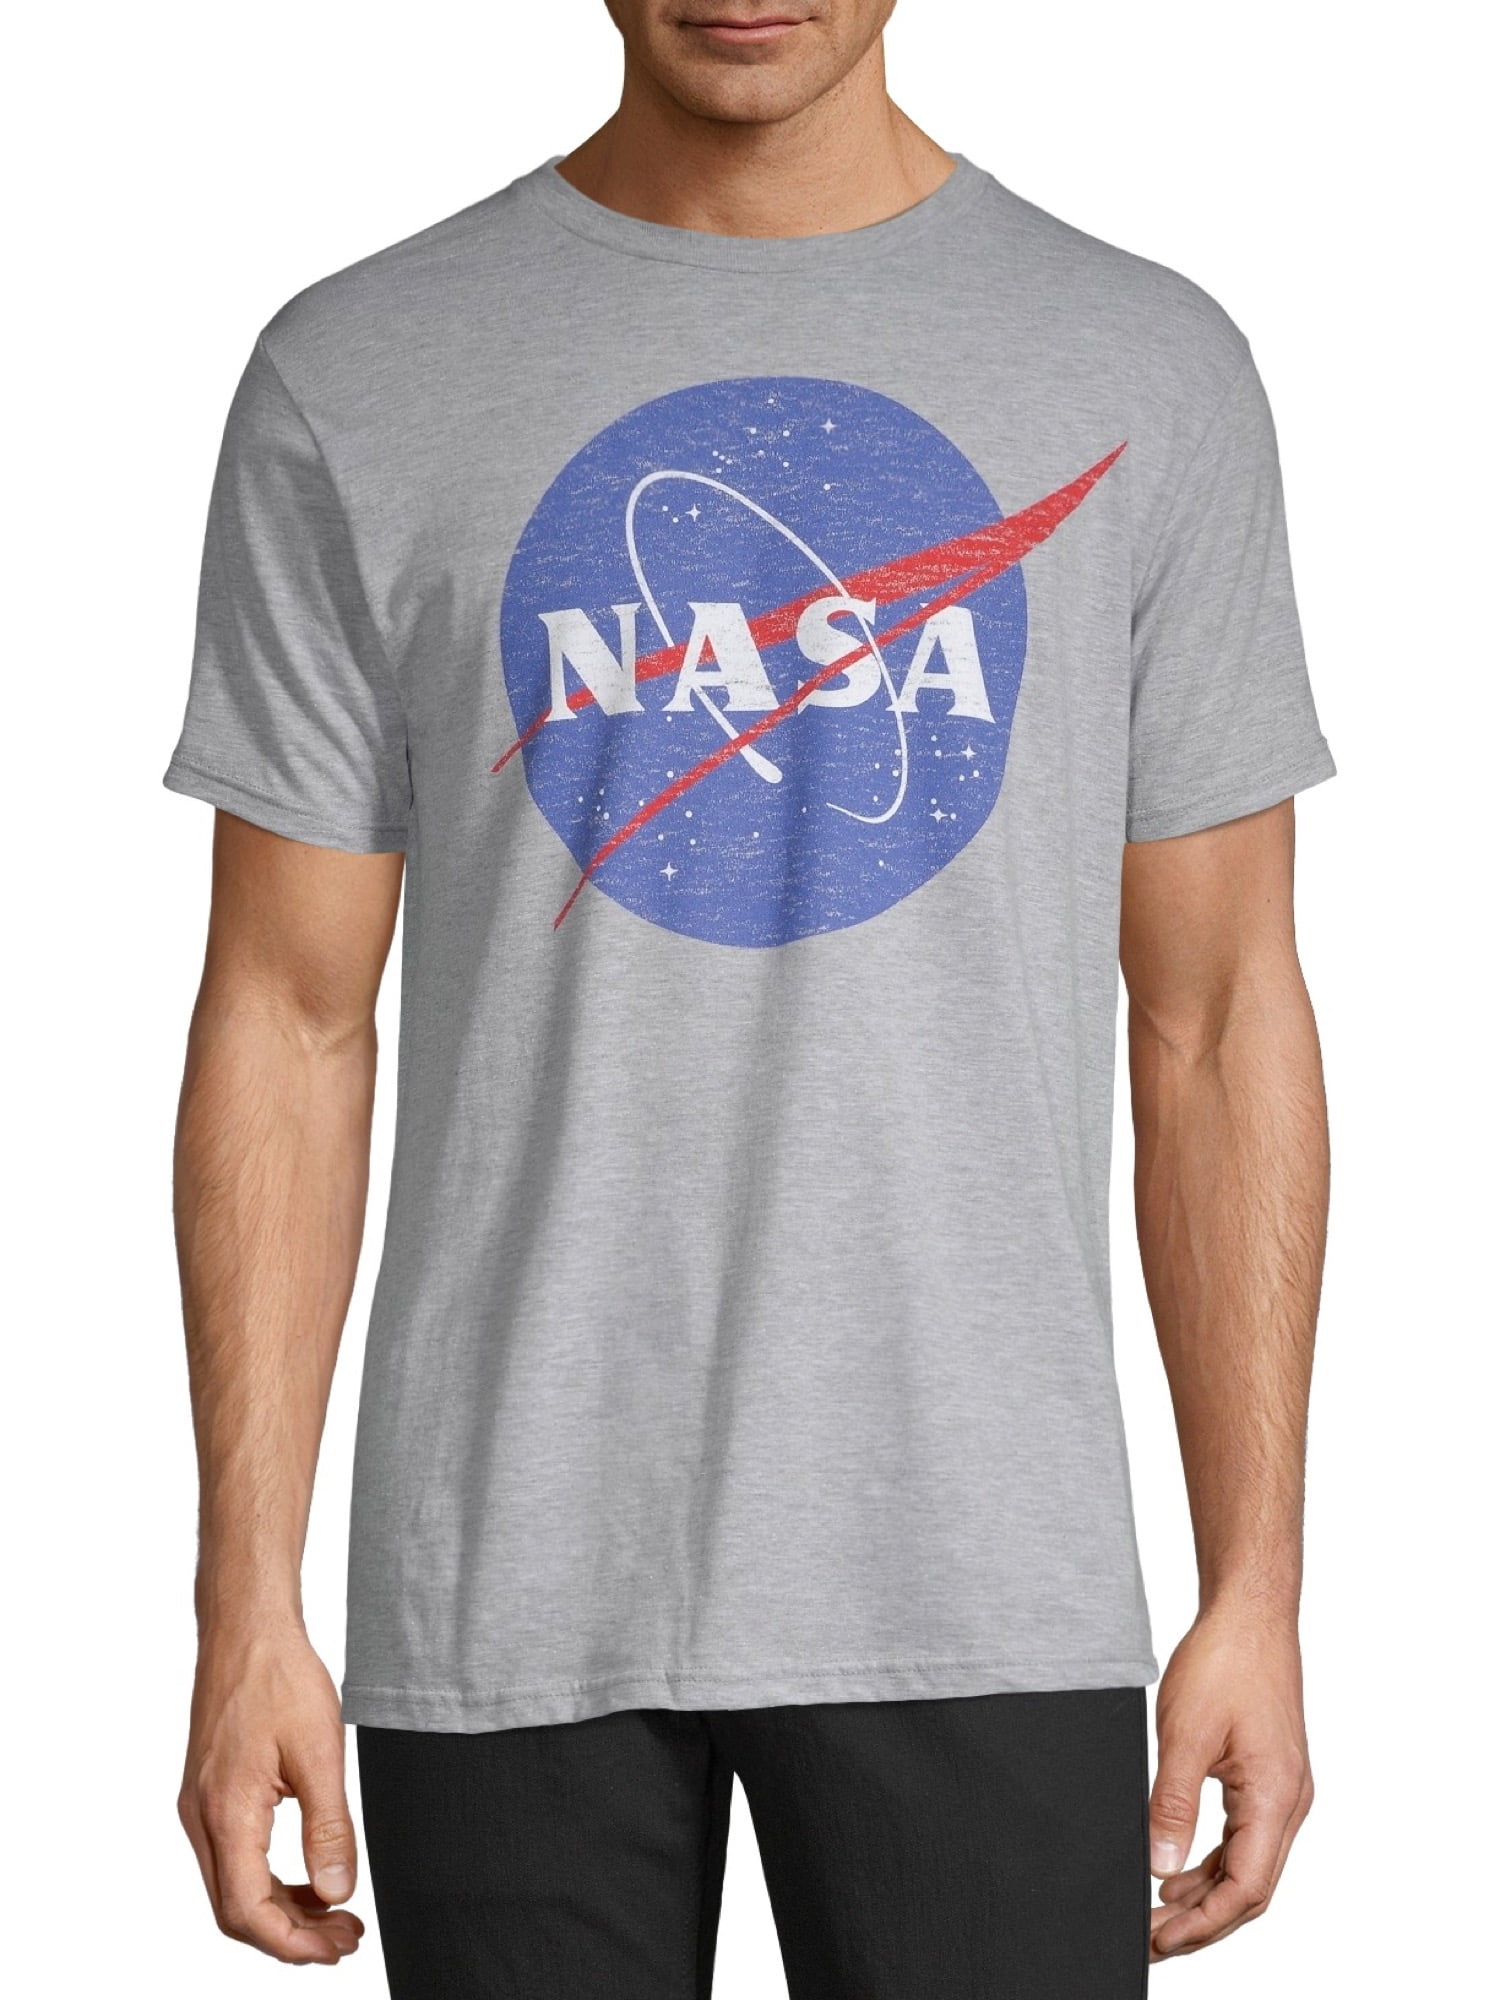 NASA DISTRESSED LOGO Licensed Adult Heather T-Shirt All Sizes 